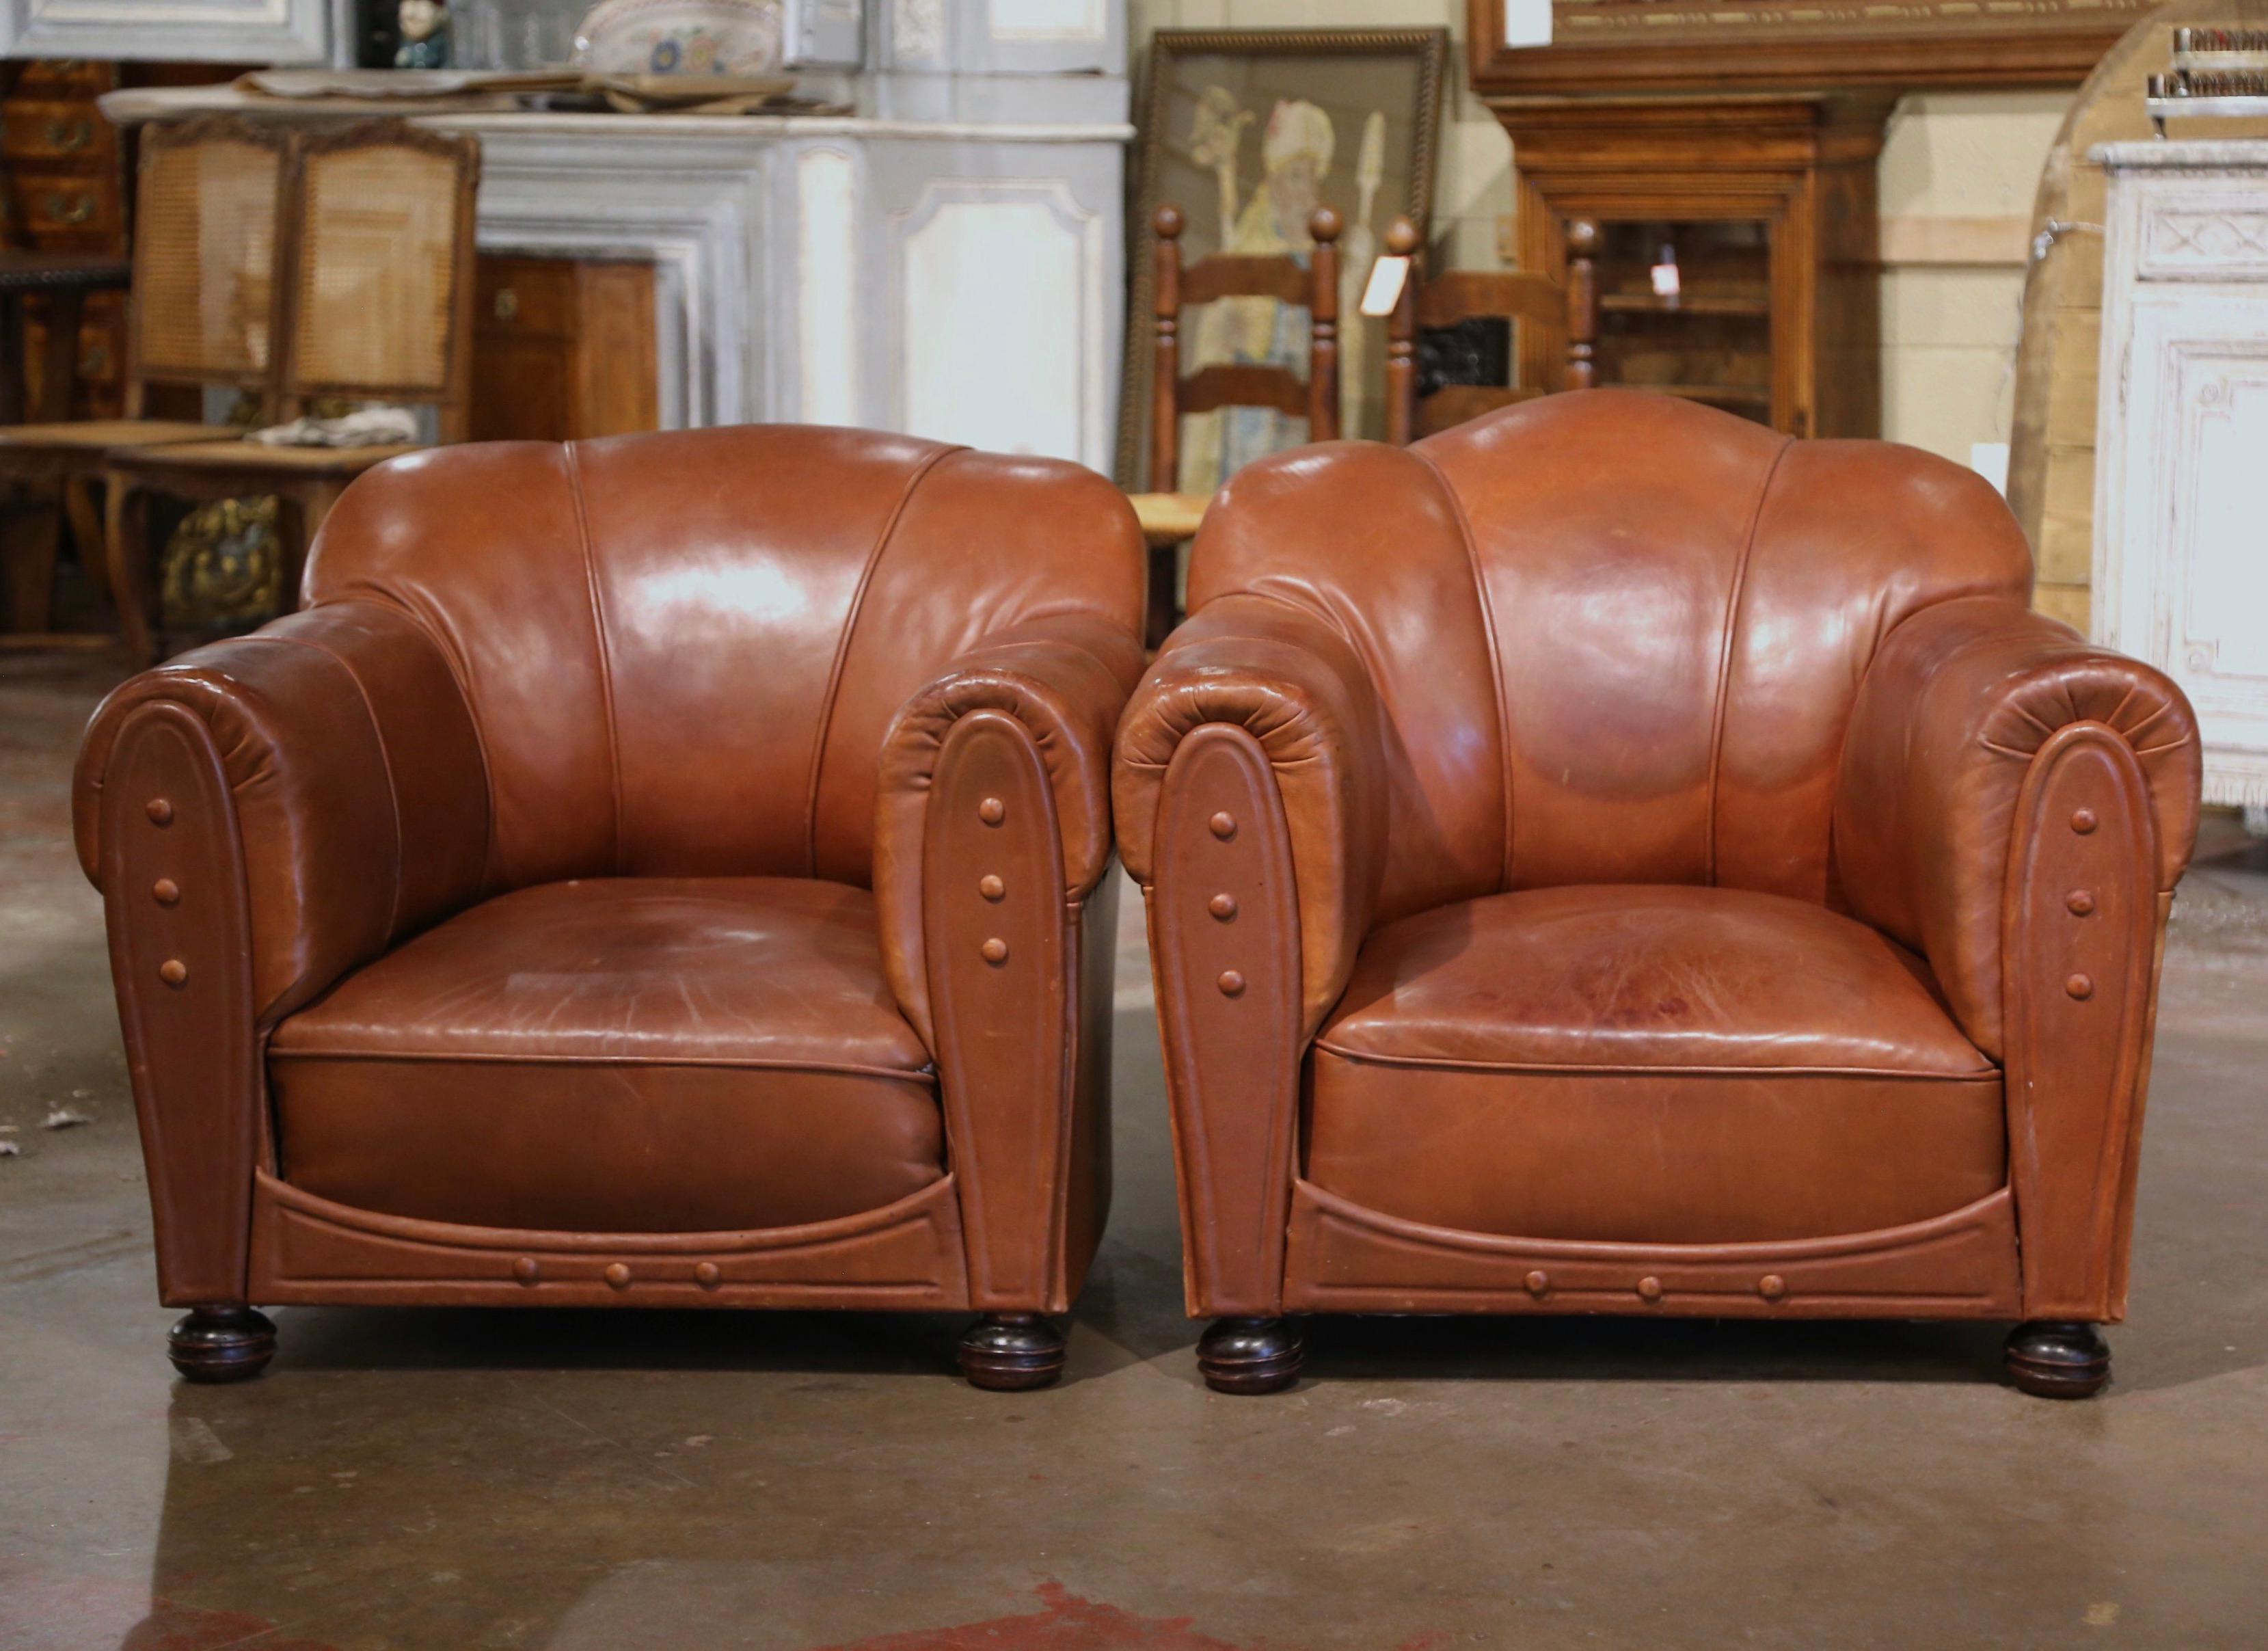 These cozy, antique Art Deco club chairs were crafted in France, circa 1930. The stately, masculine chairs feature wide, rounded armrests, an arched and scalloped top shape back, and round wooden feet in the front and square feet in the back. The